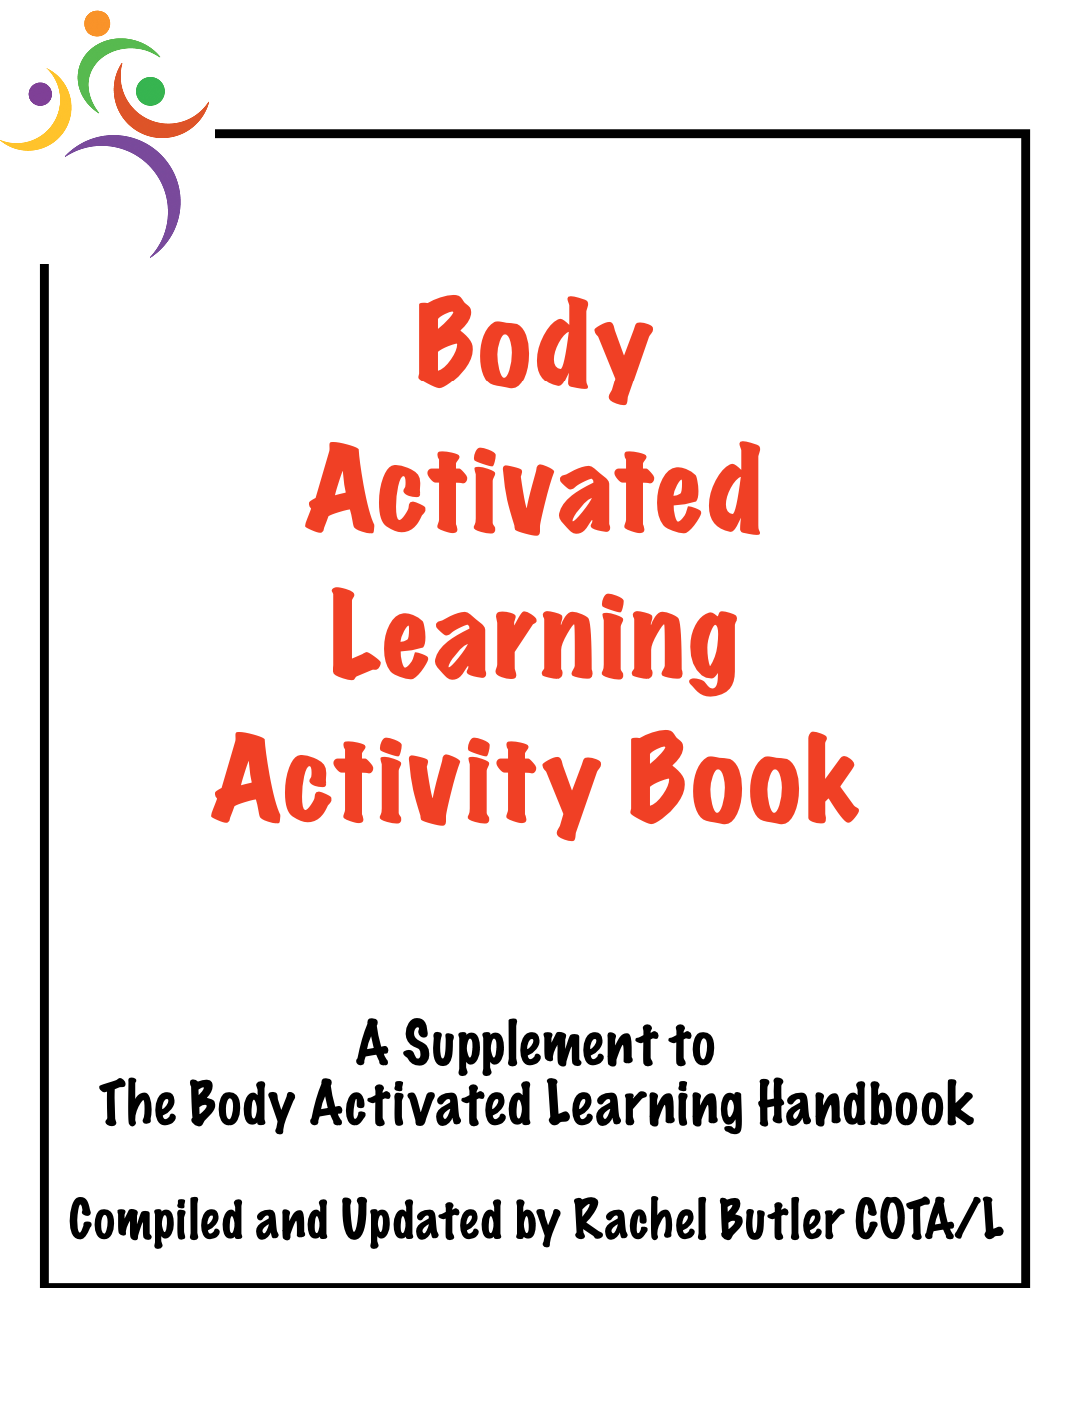 Body Activated Learning Activity Book